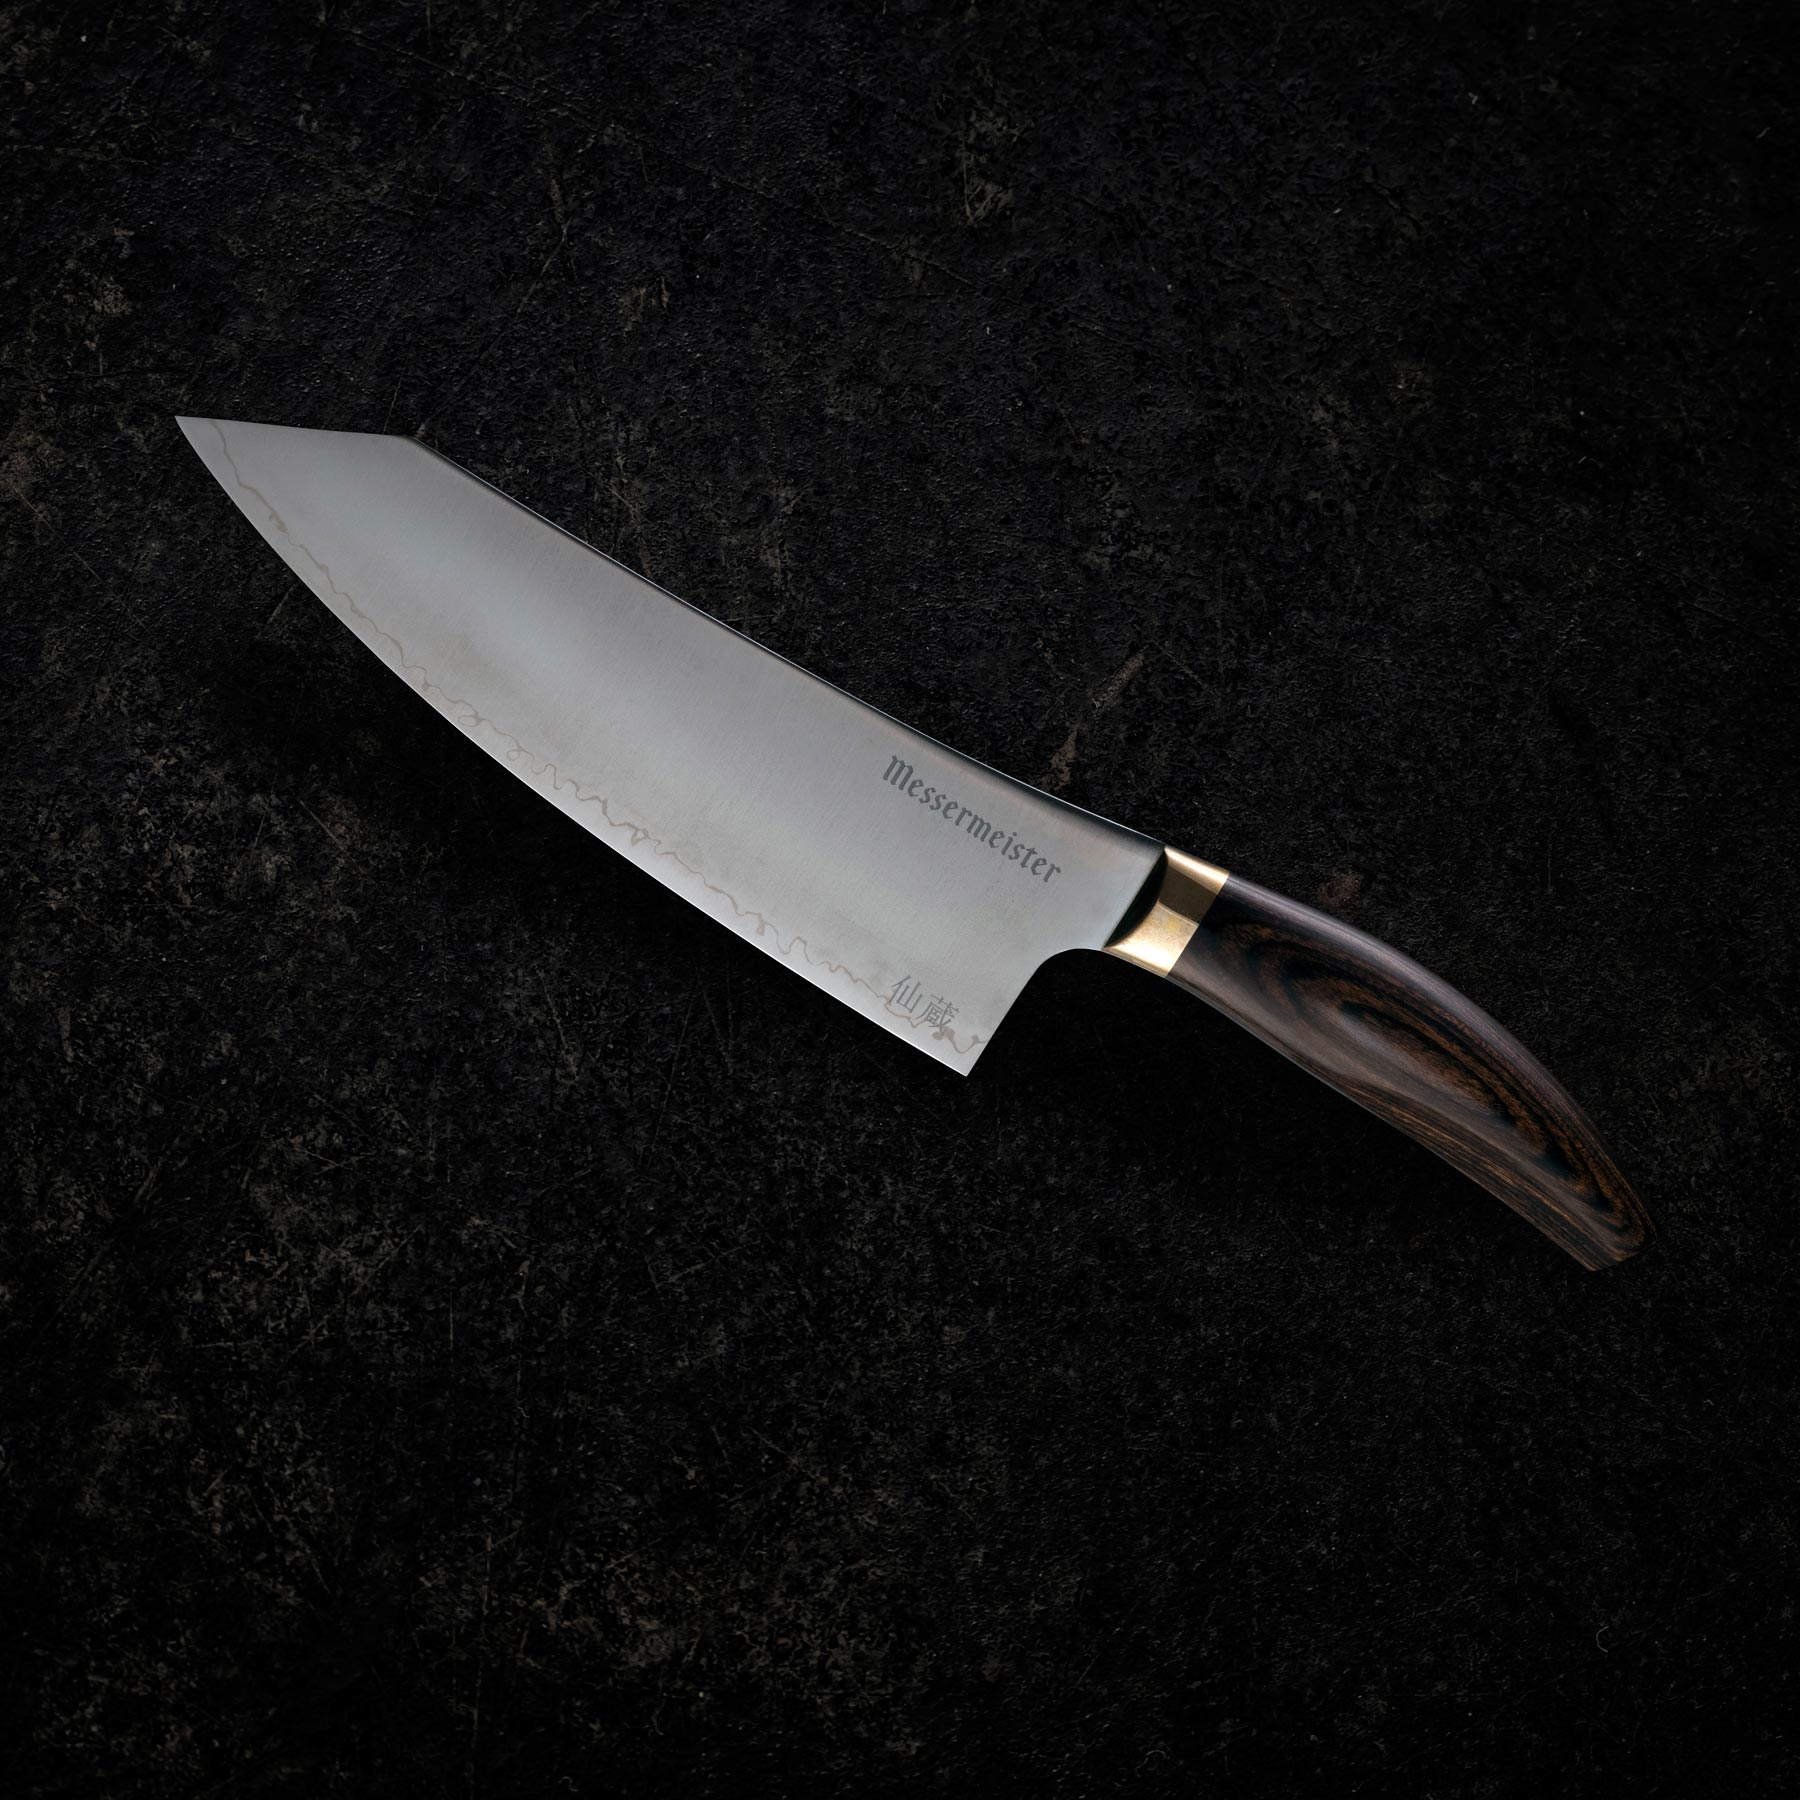 Handmade Forged FULL TANG 8 Inch Chef Knife with Leather Sheath and  Whetstone